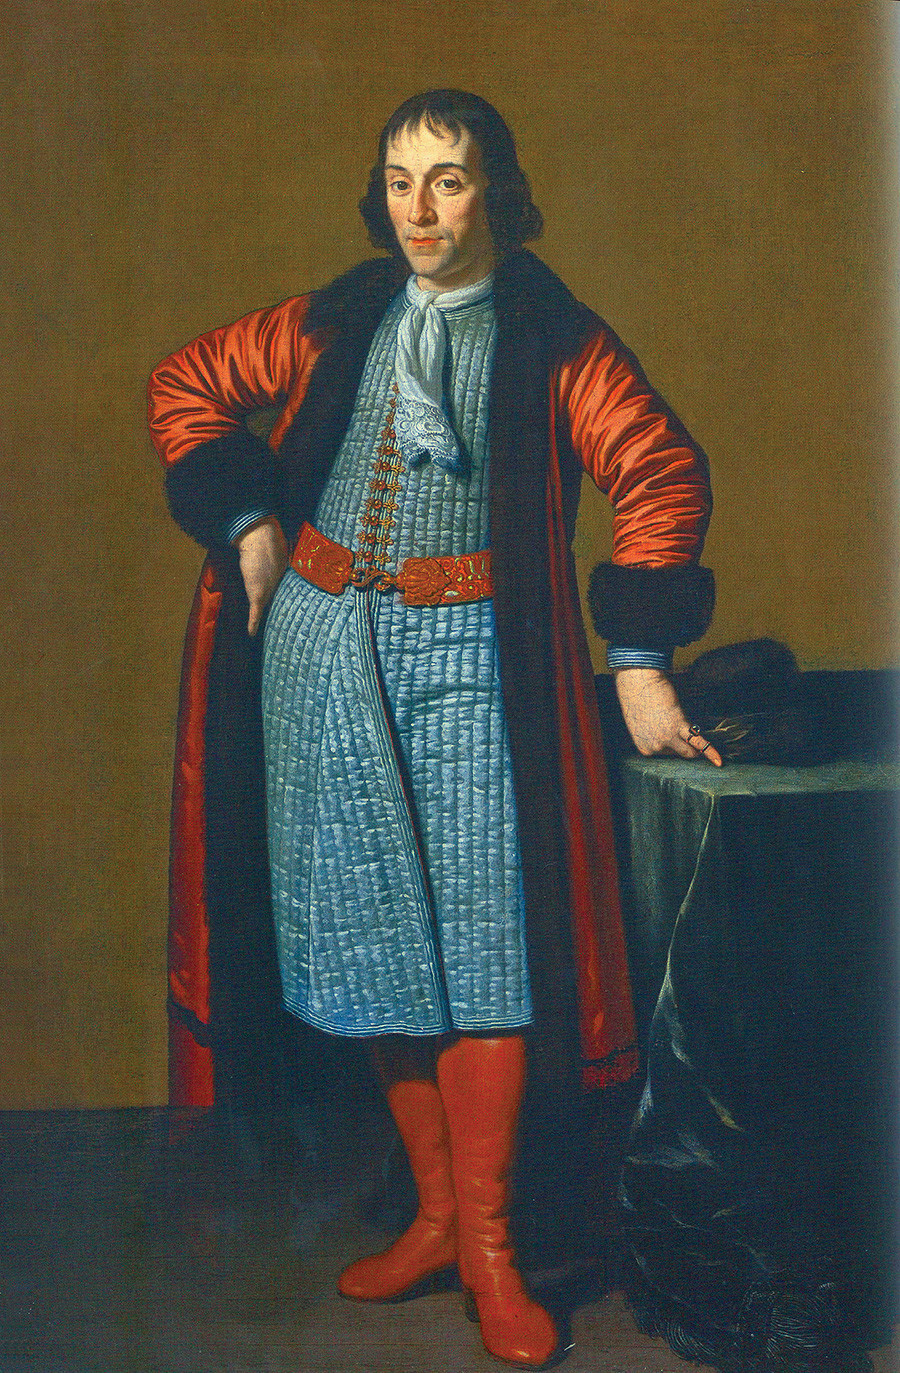 Portrait of Aleksandr Menshikov painted in Holland during Grand Embassy of Peter the Great by Michiel van Musscher.